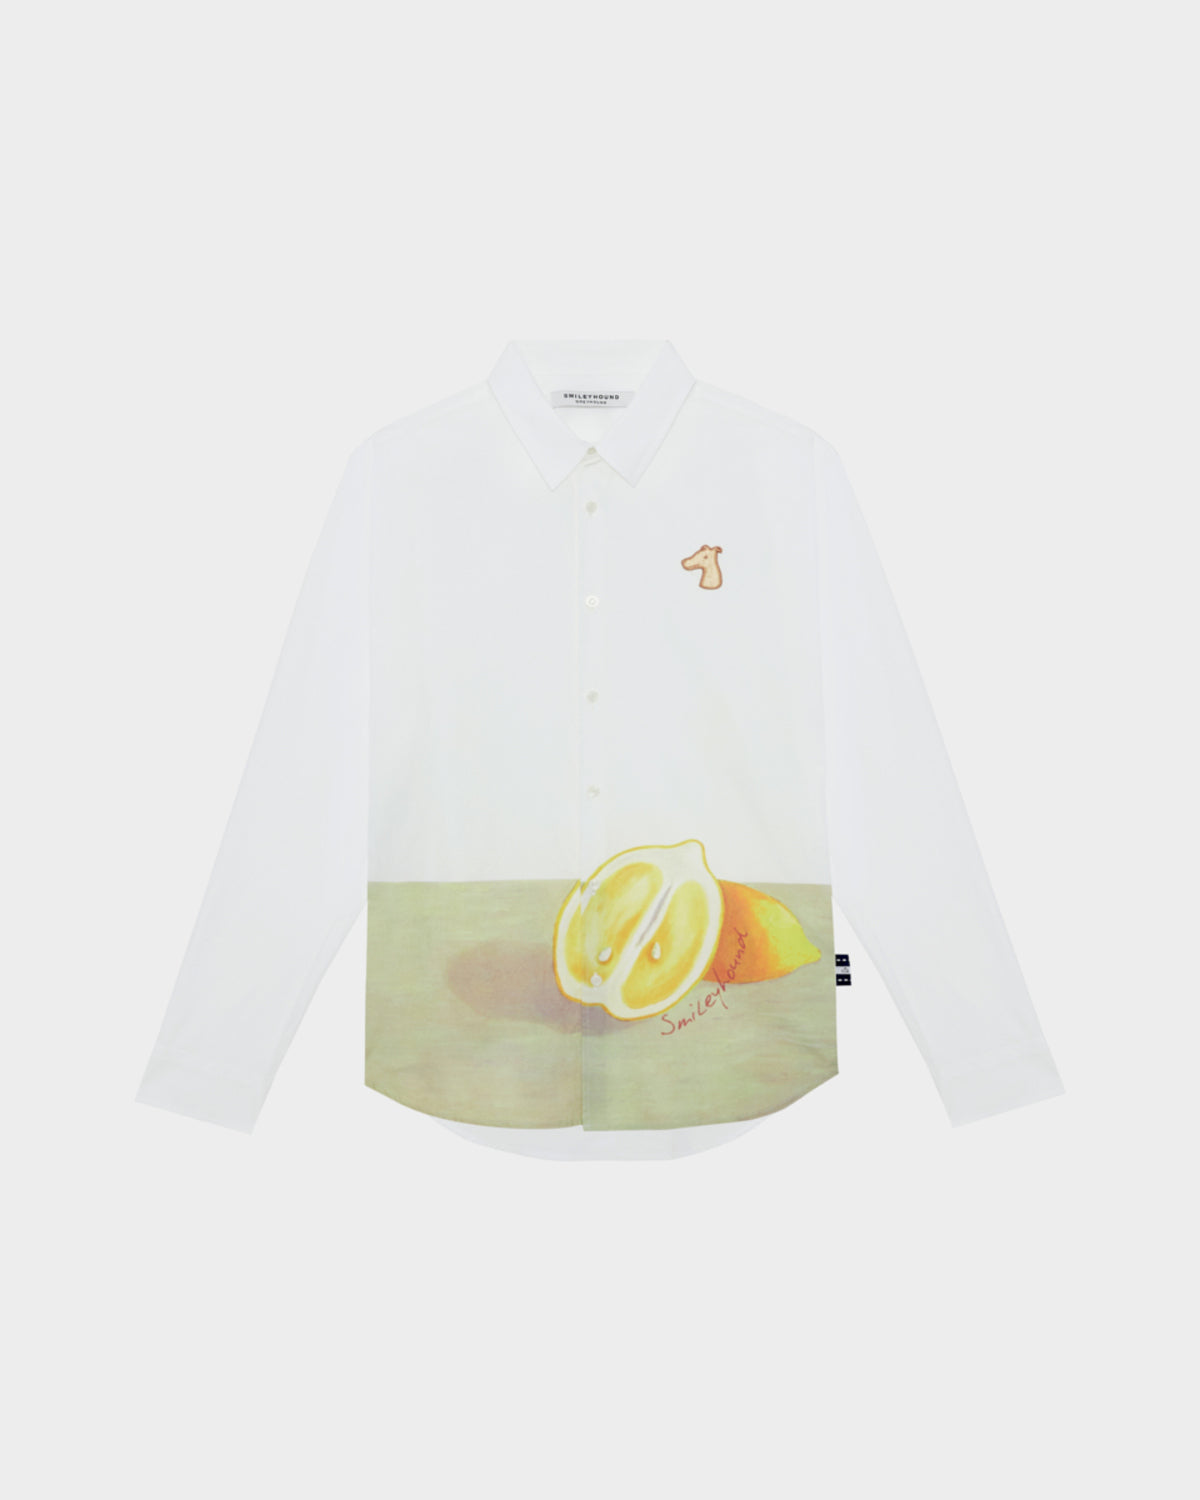 POPLIN LOOSE SHIRT WITH LOGO EMBROIDERED